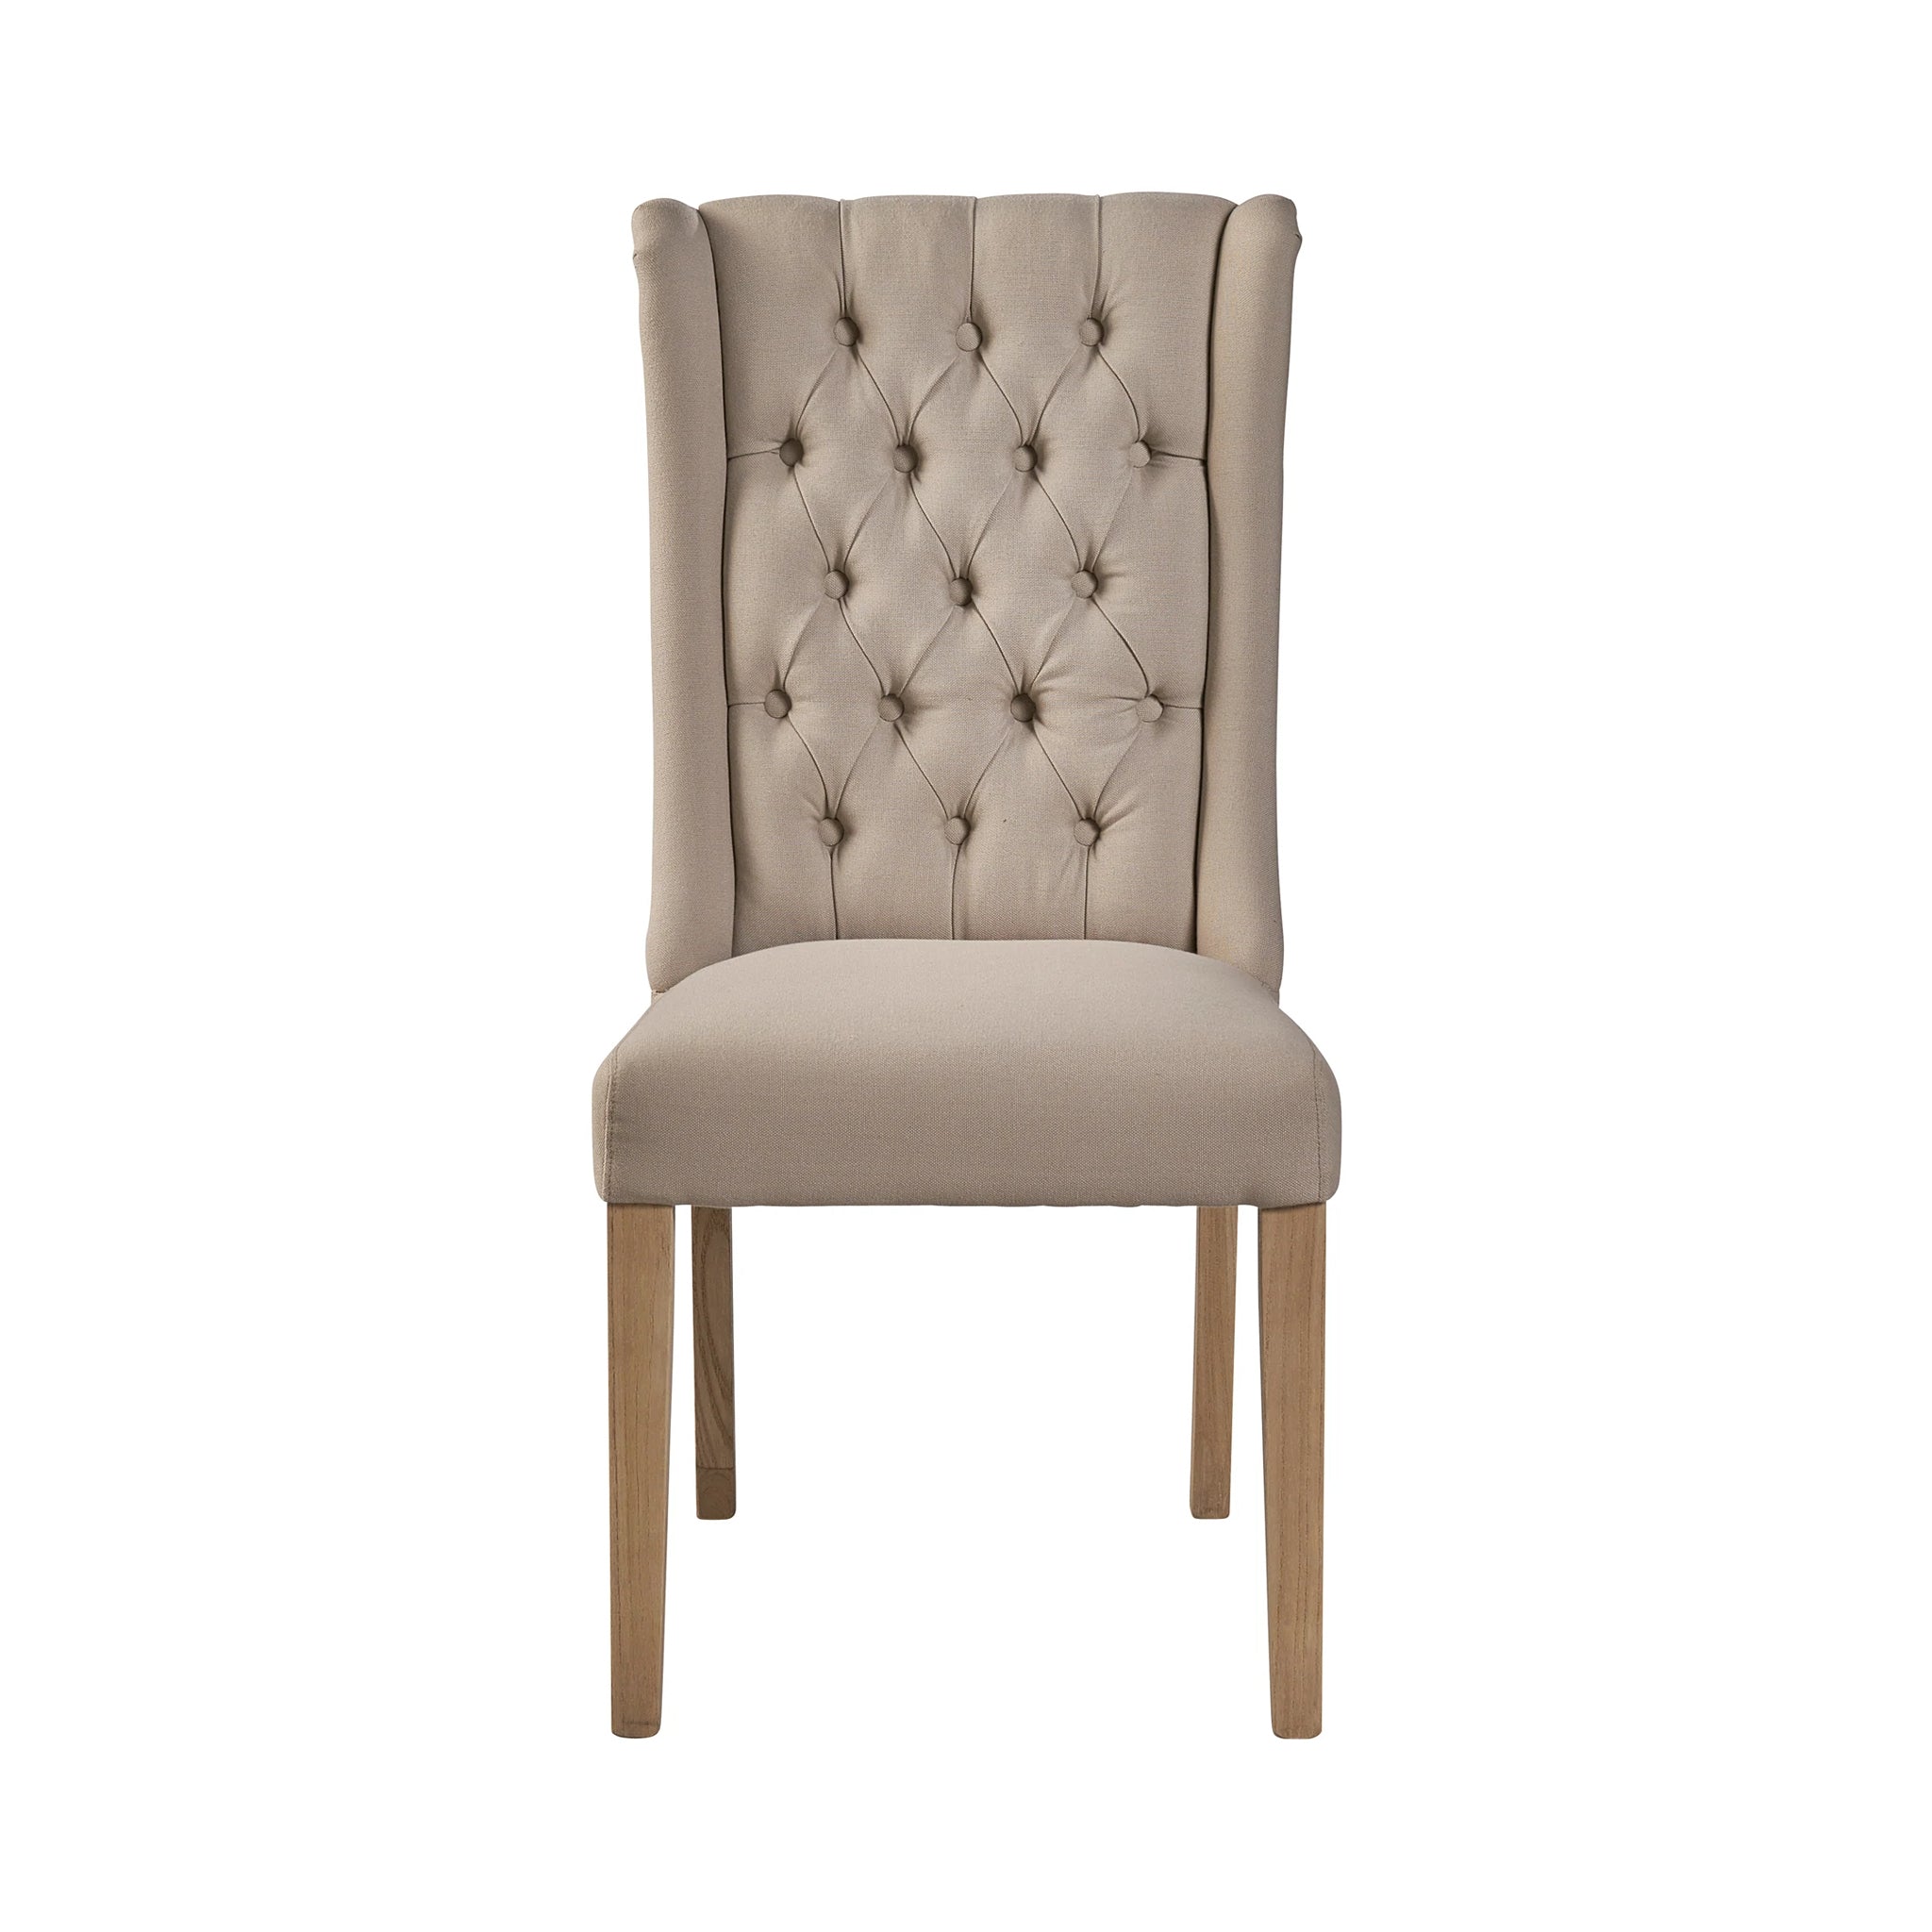 Tufted Linen and Oak Dining Chair - Set of 2